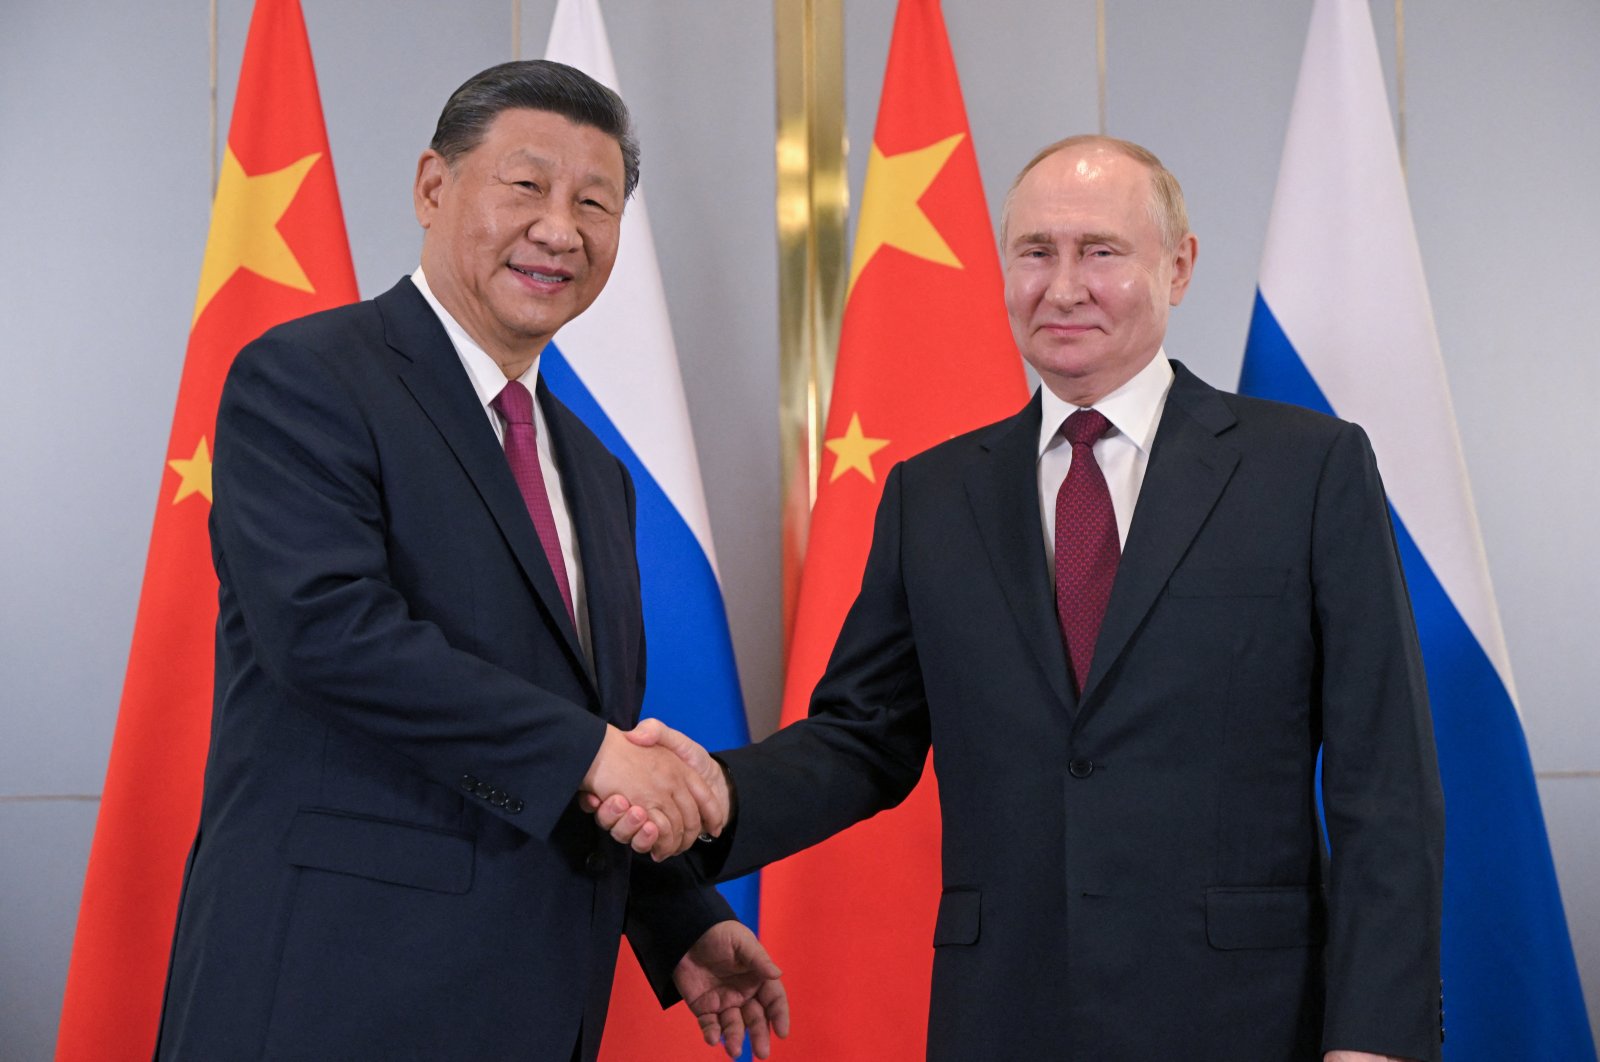 Russian President Vladimir Putin and Chinese President Xi Jinping shake hands during a meeting on the sidelines of the Shanghai Cooperation Organization (SCO) summit in Astana, Kazakhstan, July 3, 2024. (Reuters Photo)